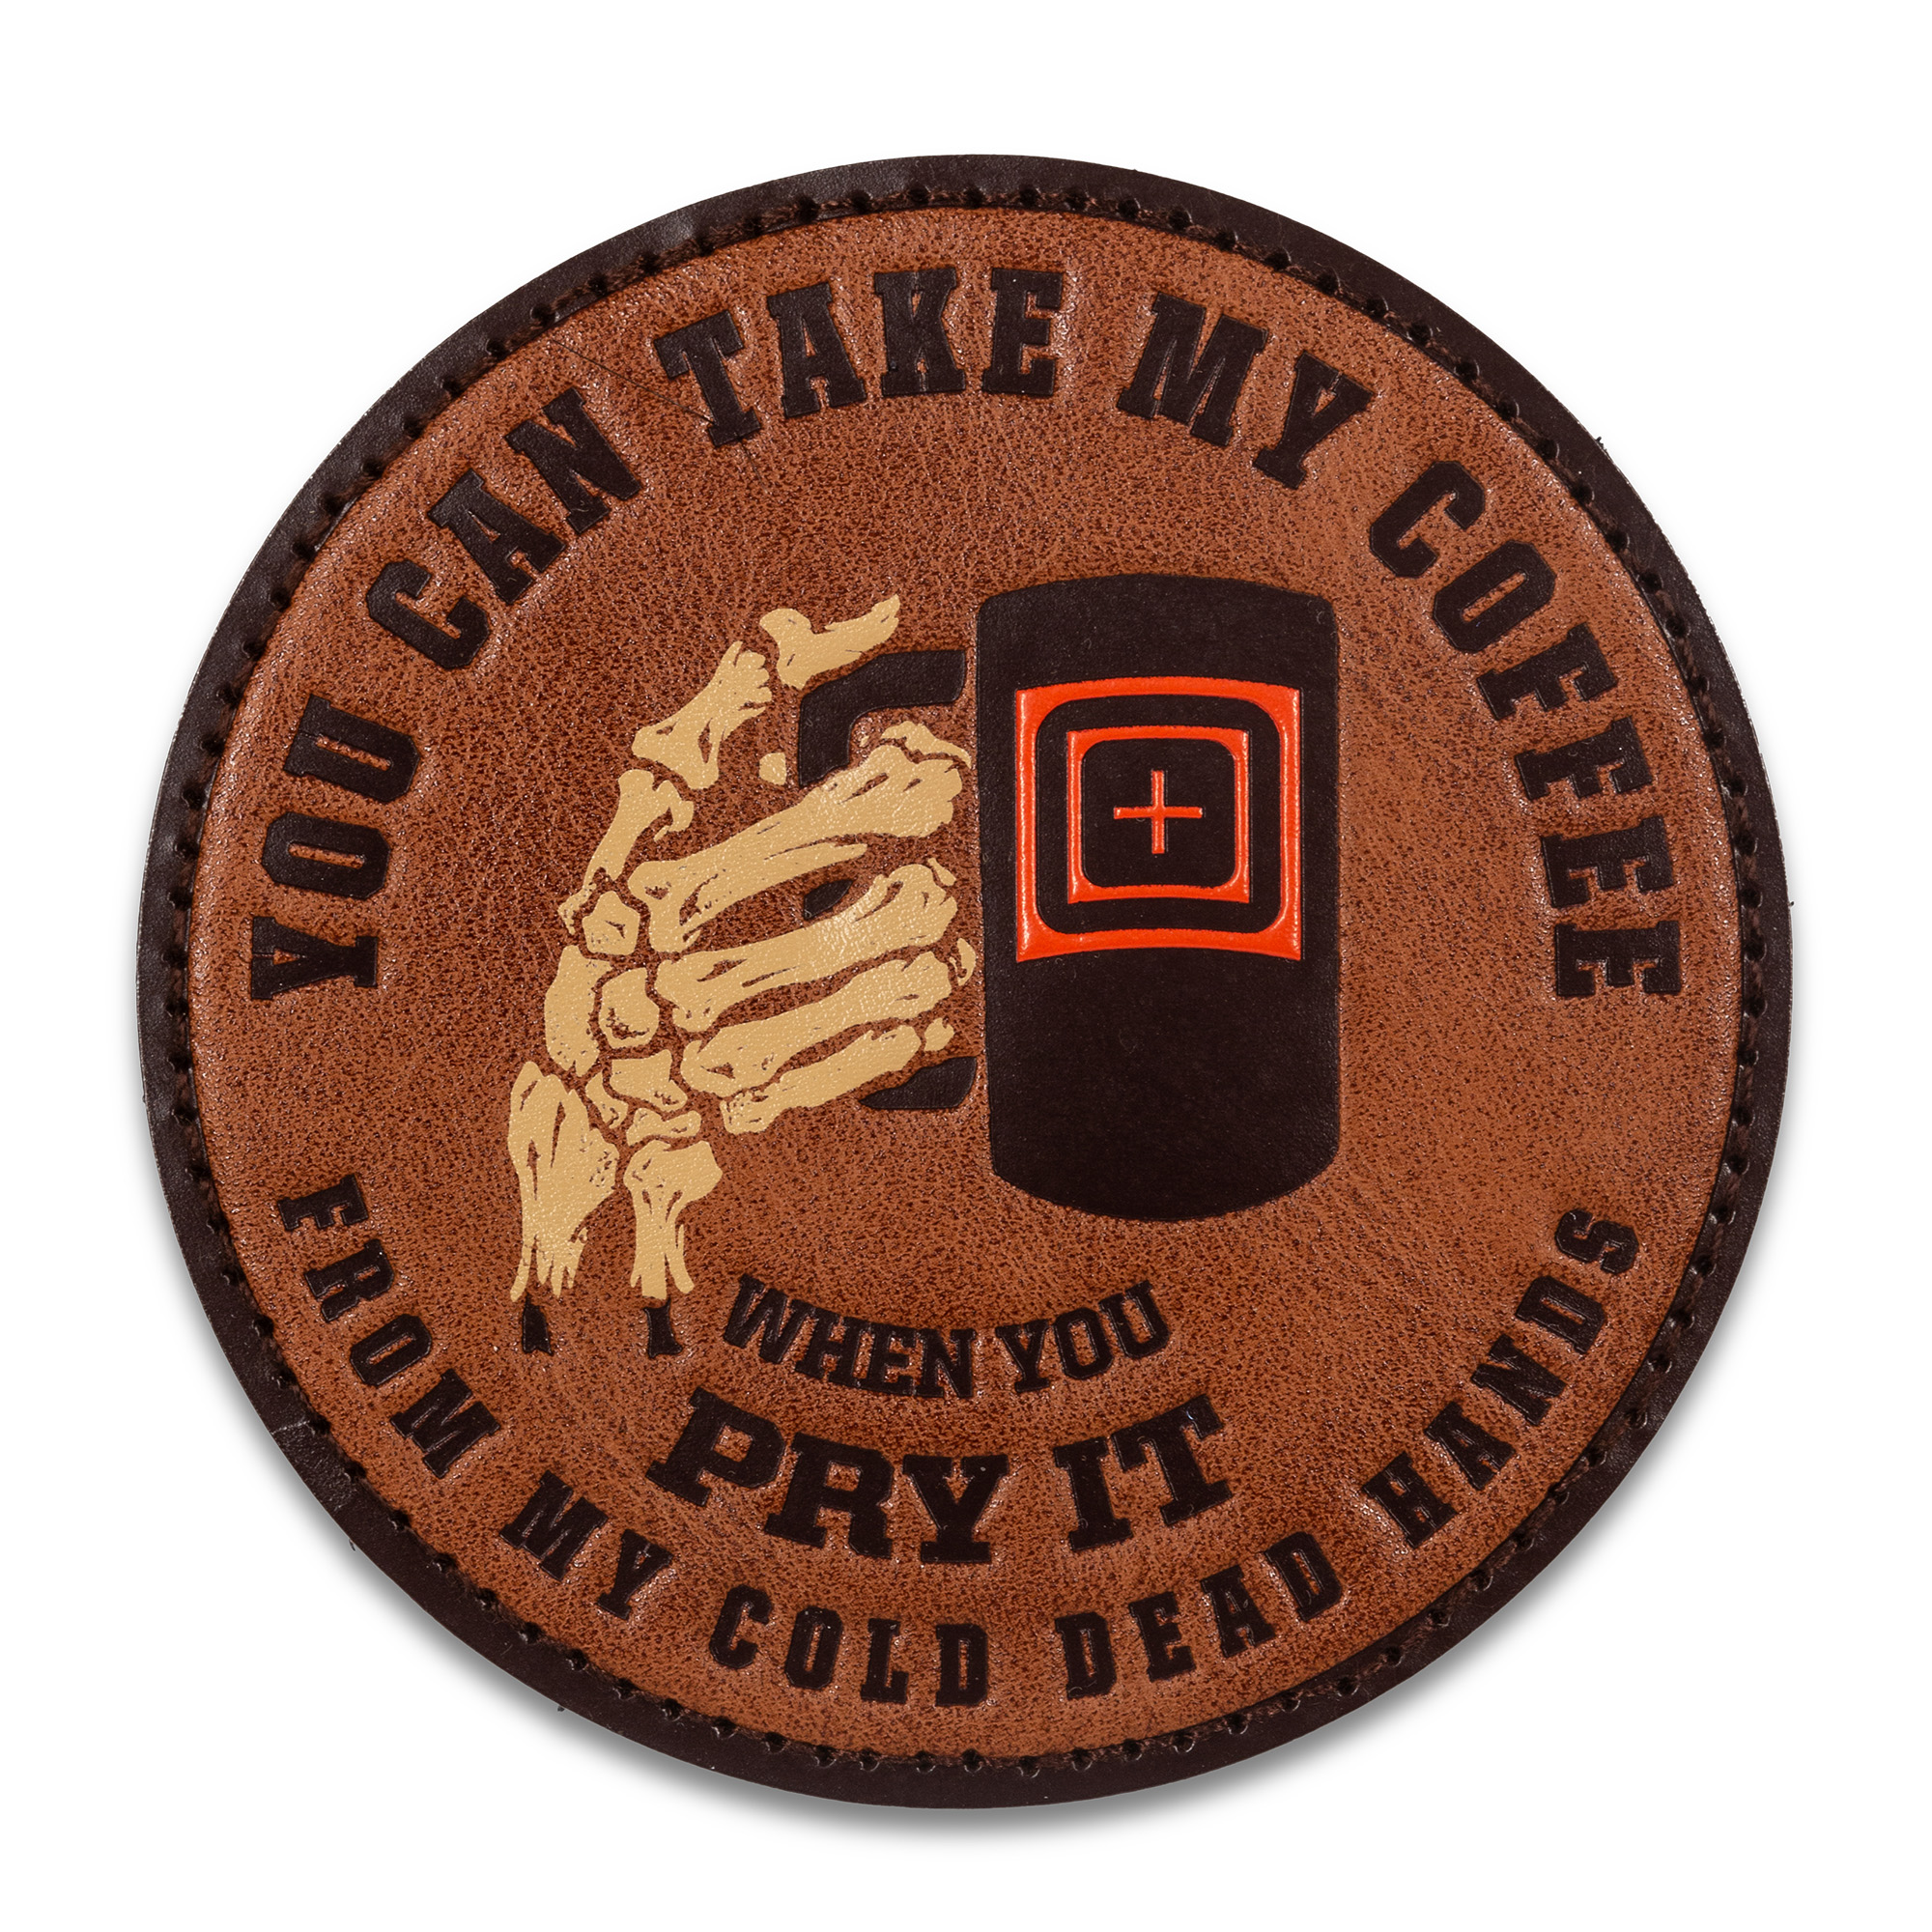 5.11 Tactical® Iceberg Assassin Patch